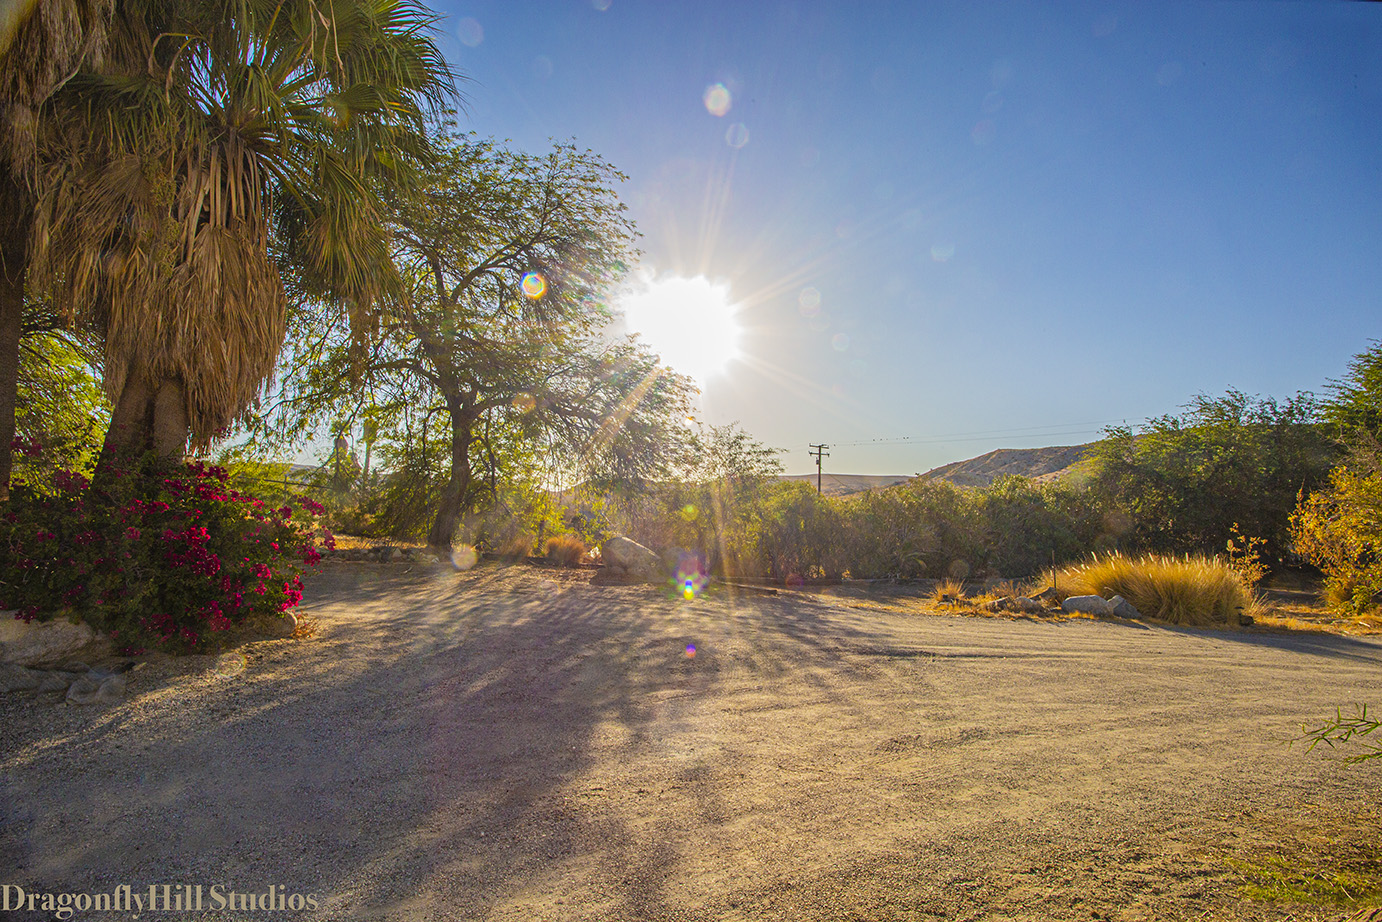 Good Morning (The View from Our Front Porch) by Emma Rosenthal of DragonflyHill Studios Our dirt driveway with the hills in the distance, light diffused through leaves, trees and grasses. Early morning golden light. Light flares and colorful circles. Deep blue skies. Palm trees, bougainvillea and mesquite trees.